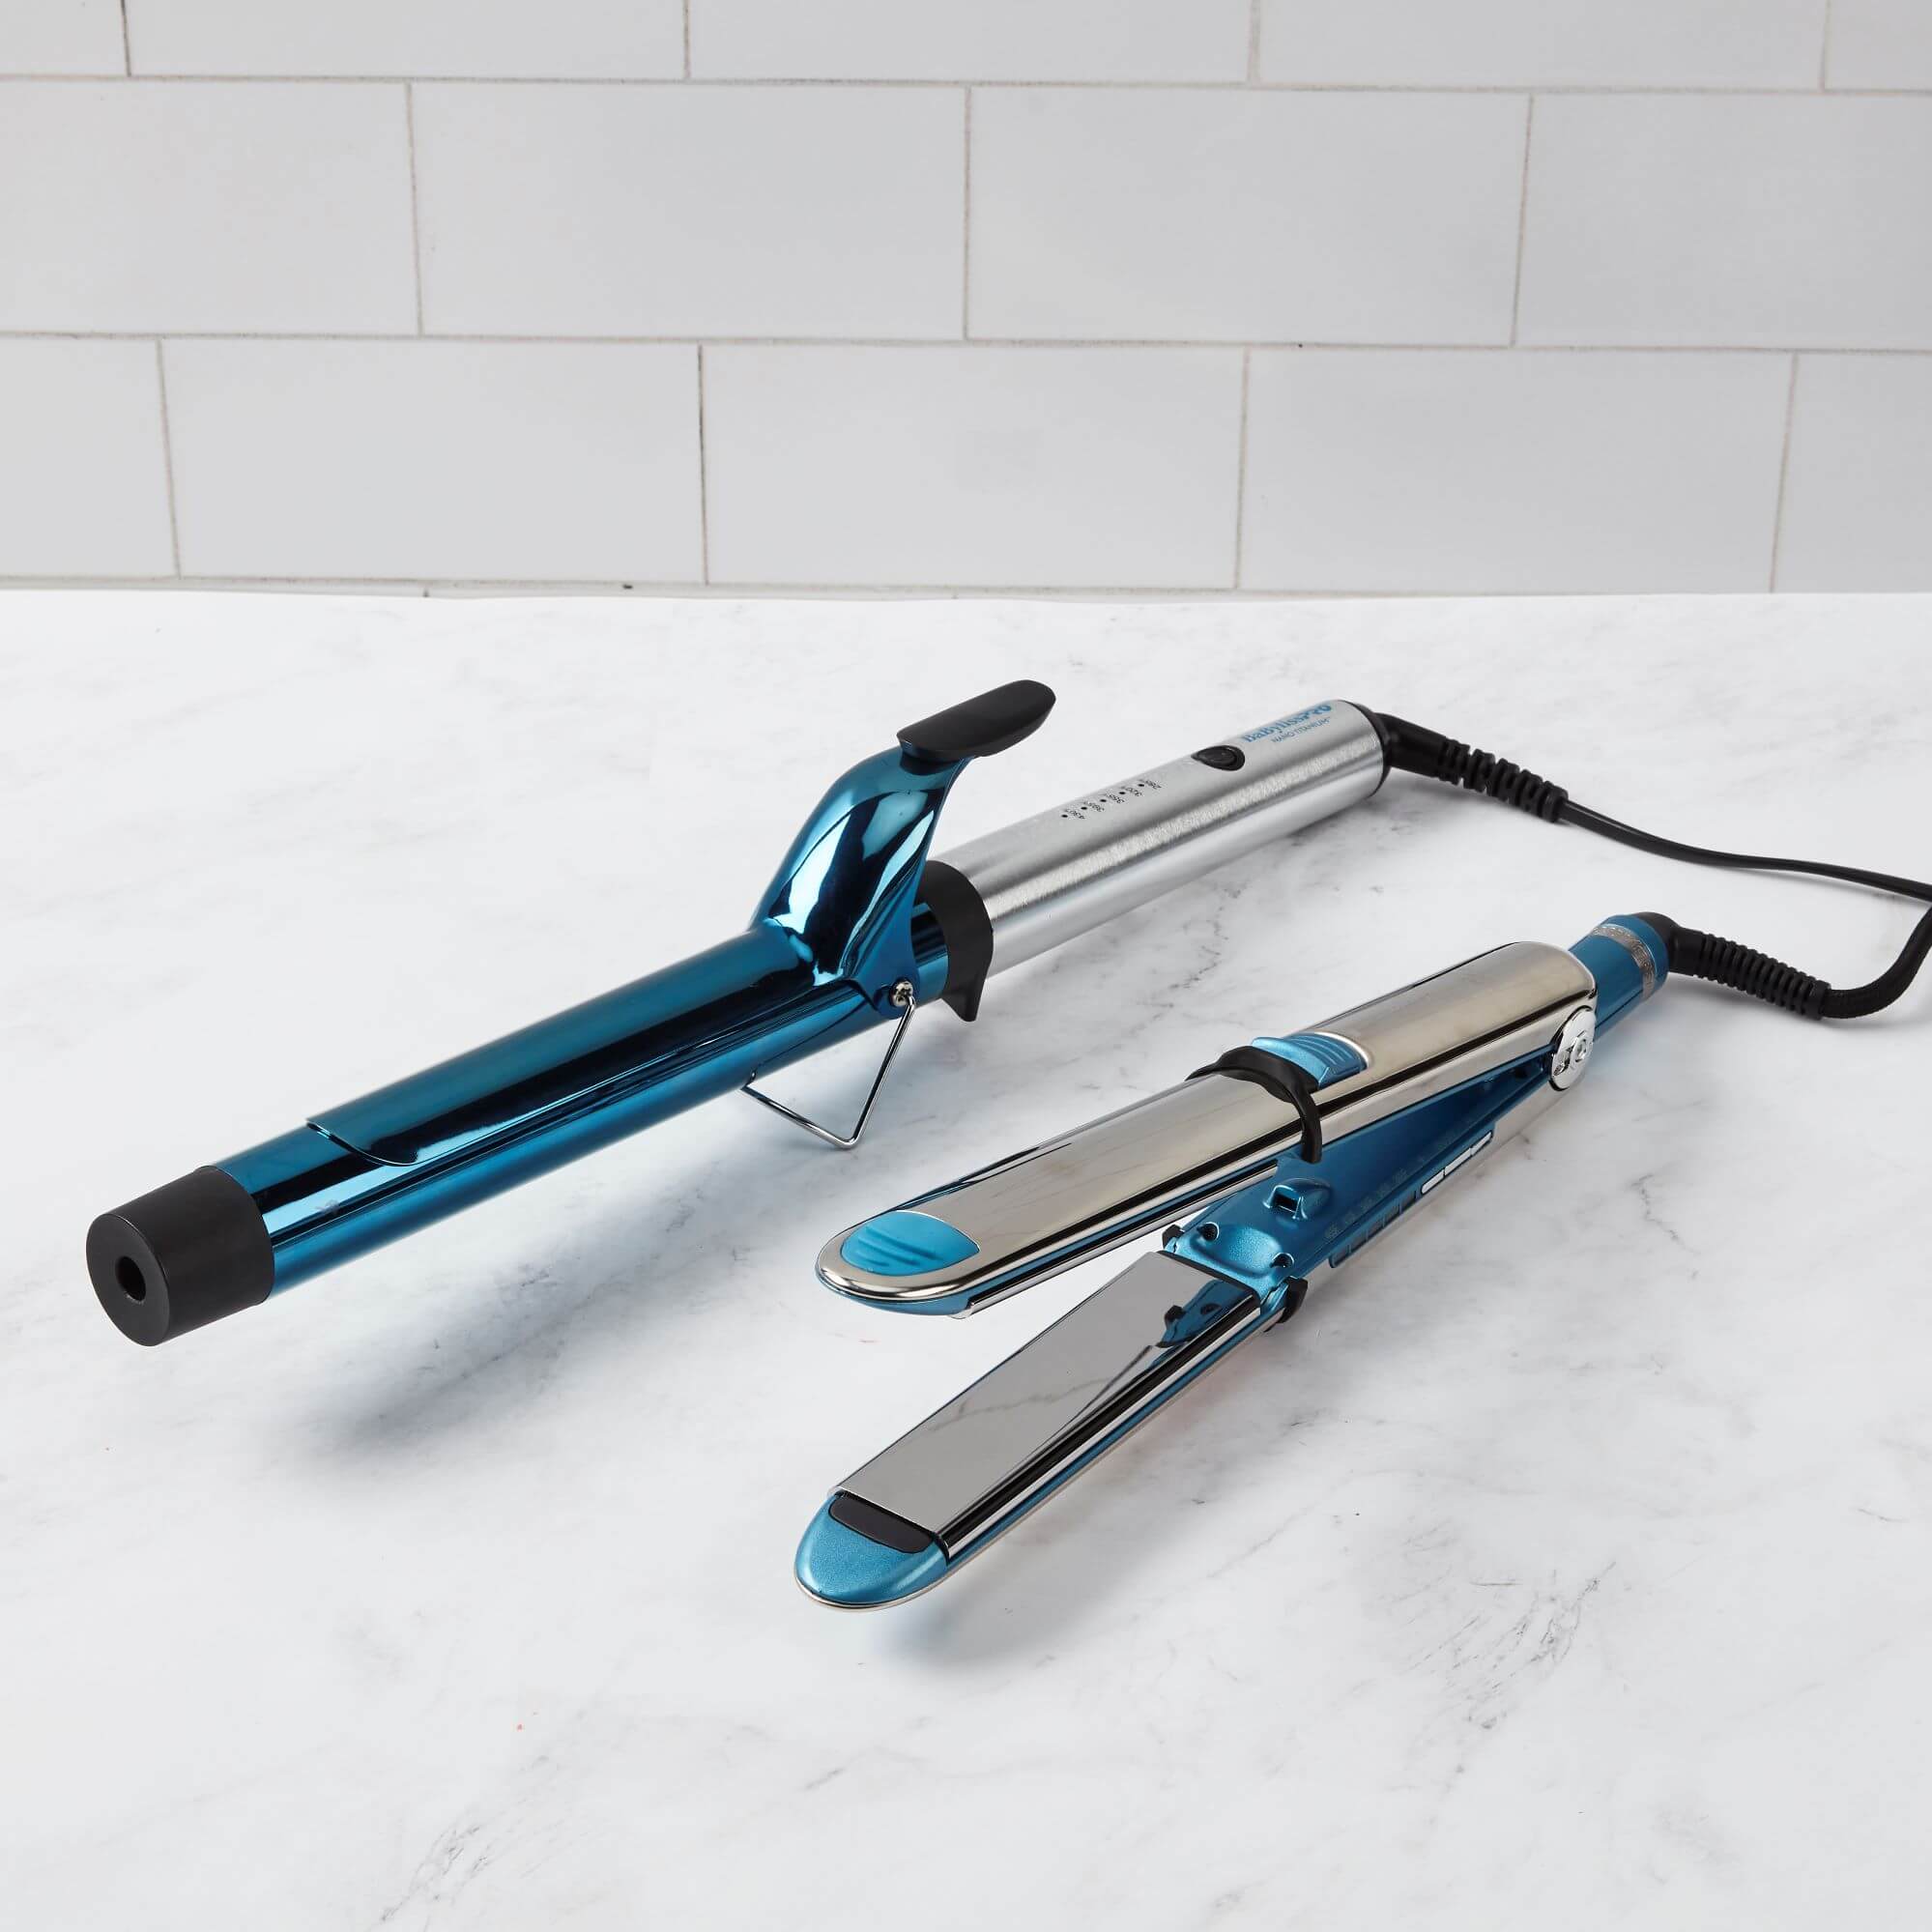 BaBylissPro Malta - Hey Pro Barbers We can Customize your Clippers and  Trimmers up to 5 different colors. Order your now.. or contact us on  79423420 .. BabylissPro..were Professionals come to!!